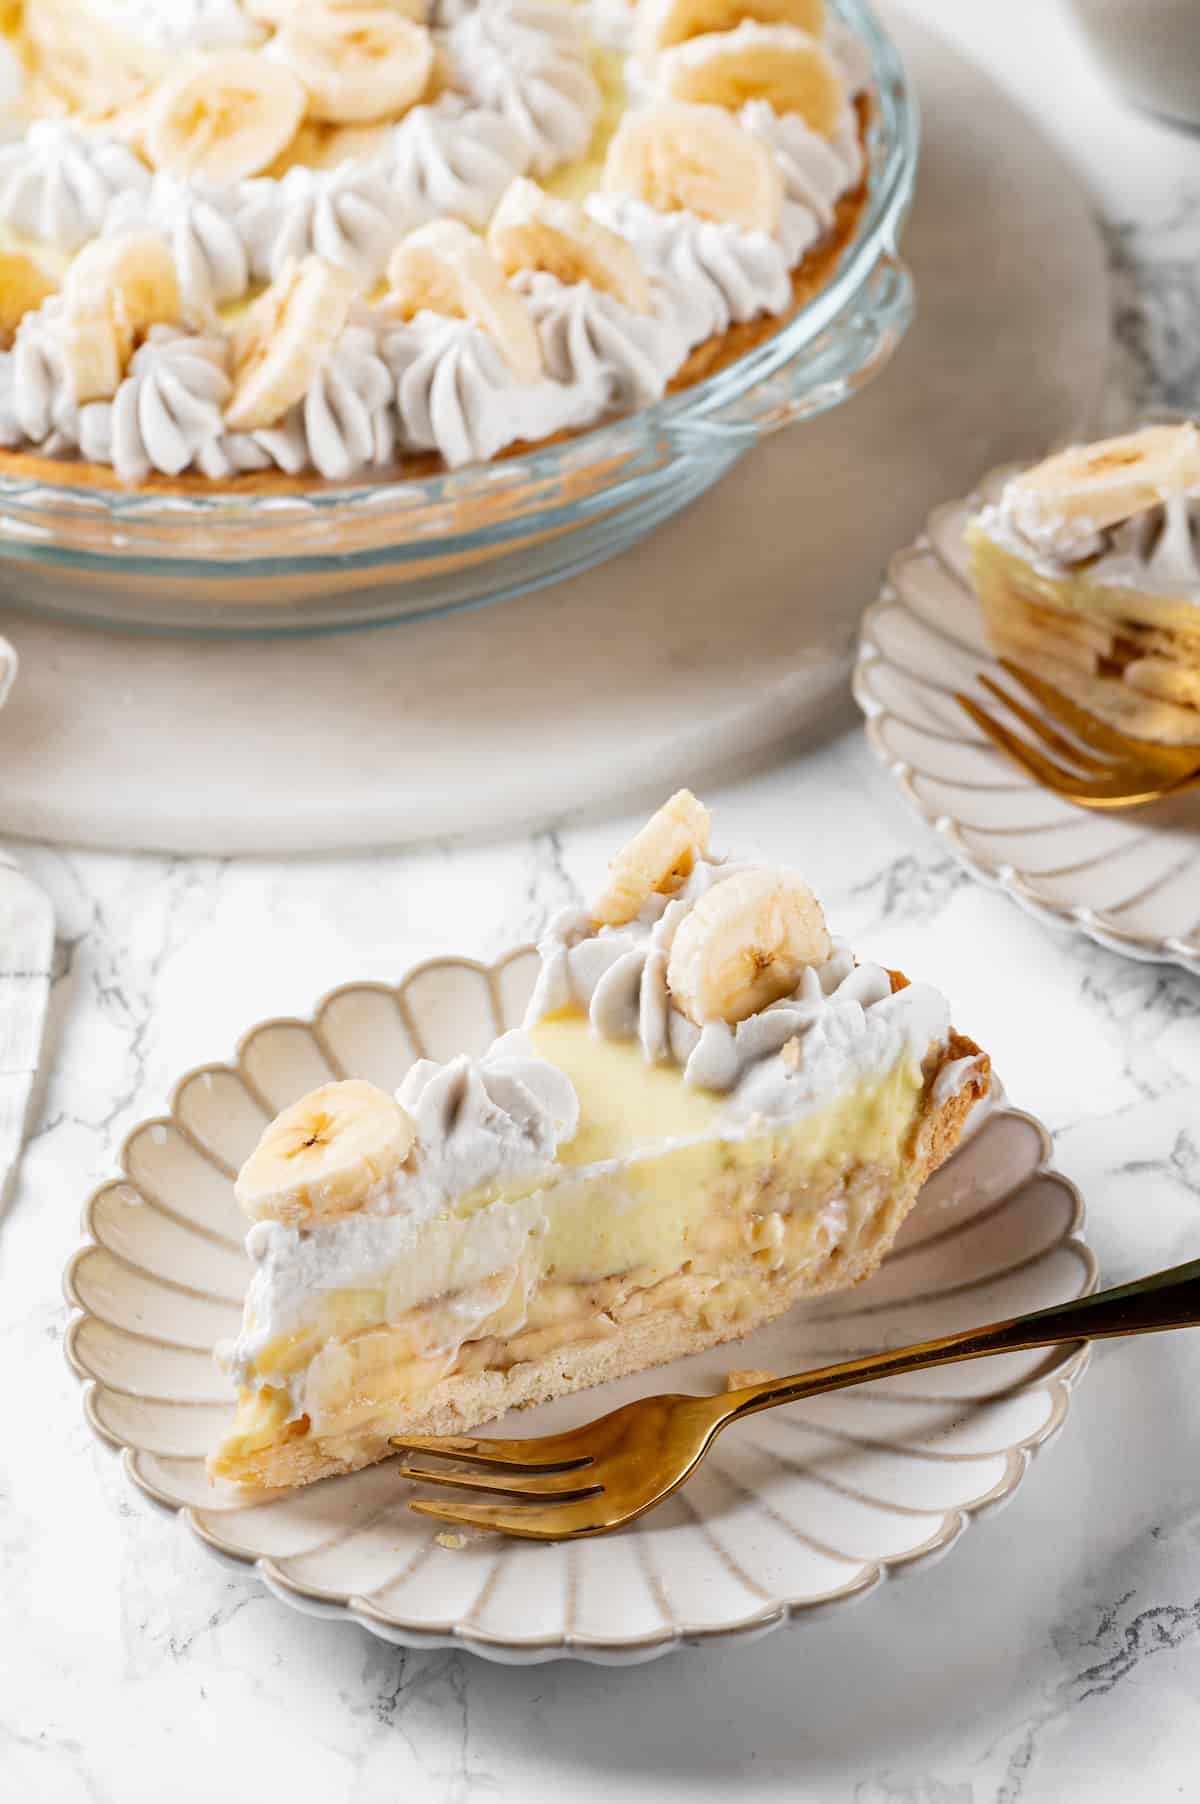 Banana cream pie slice on plate with fork, with remaining pie in background